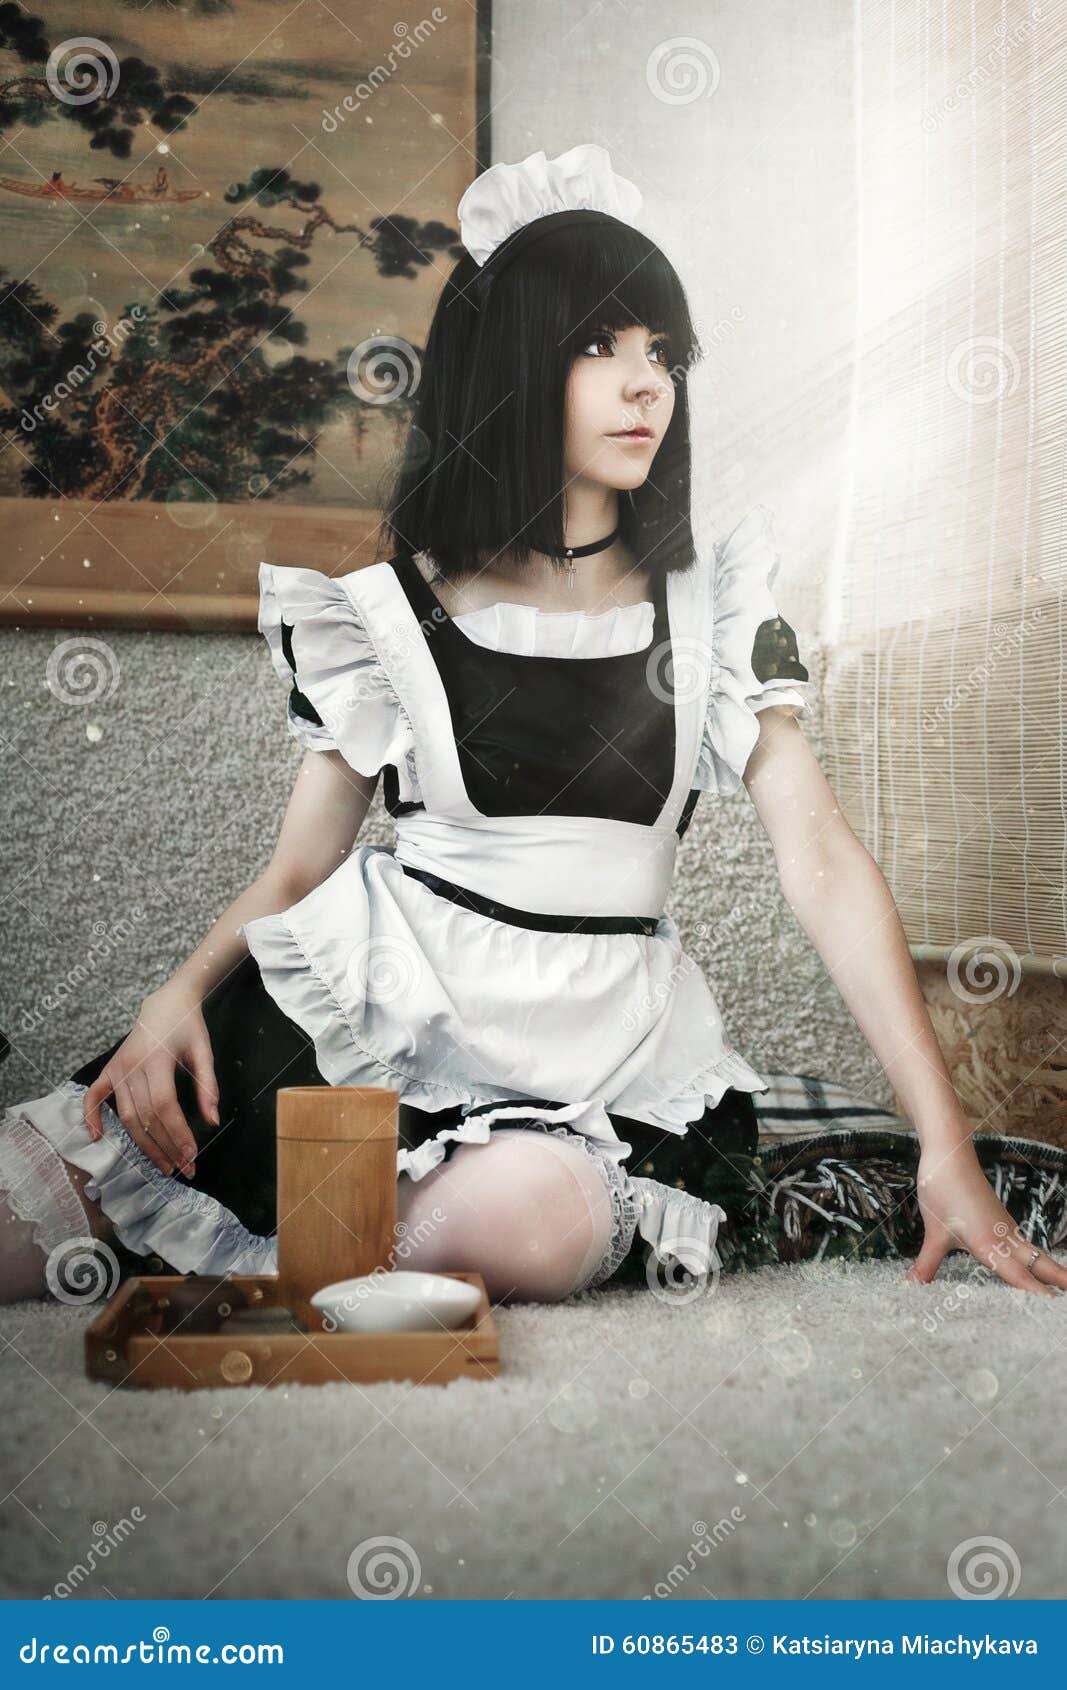 Cute Girl Maid Stock Image Image Of Hands Fantasy Costume 60865483